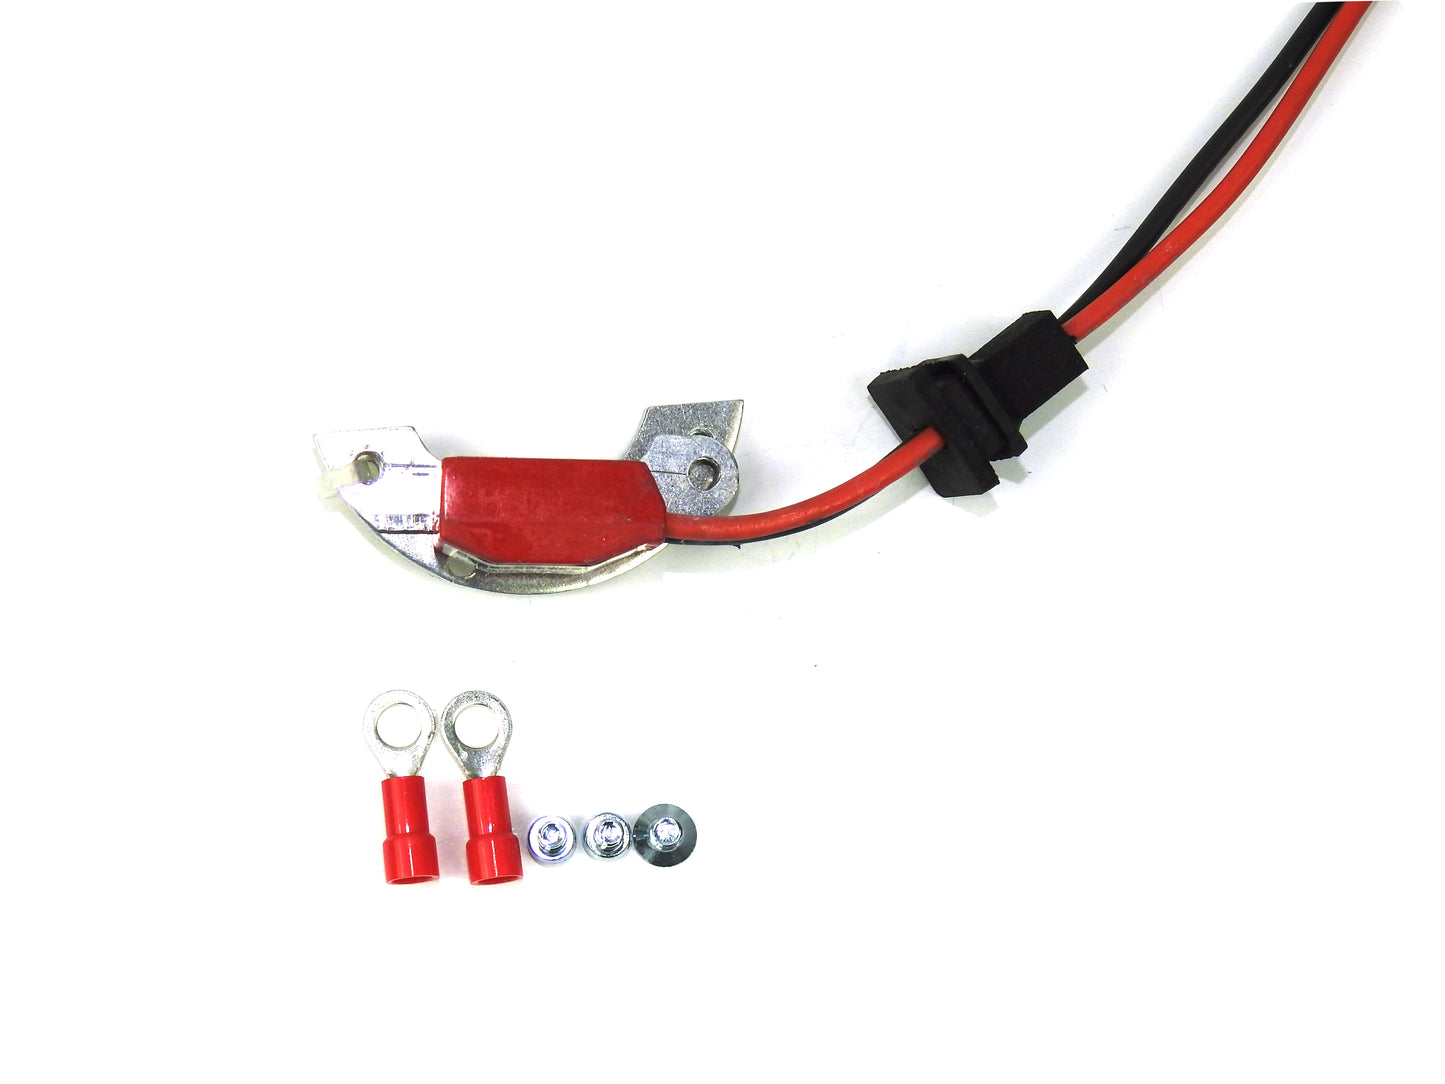 PerTronix 91887LS Ignitor® II Mercedes 8 cyl Electronic Ignition Conversion Kit